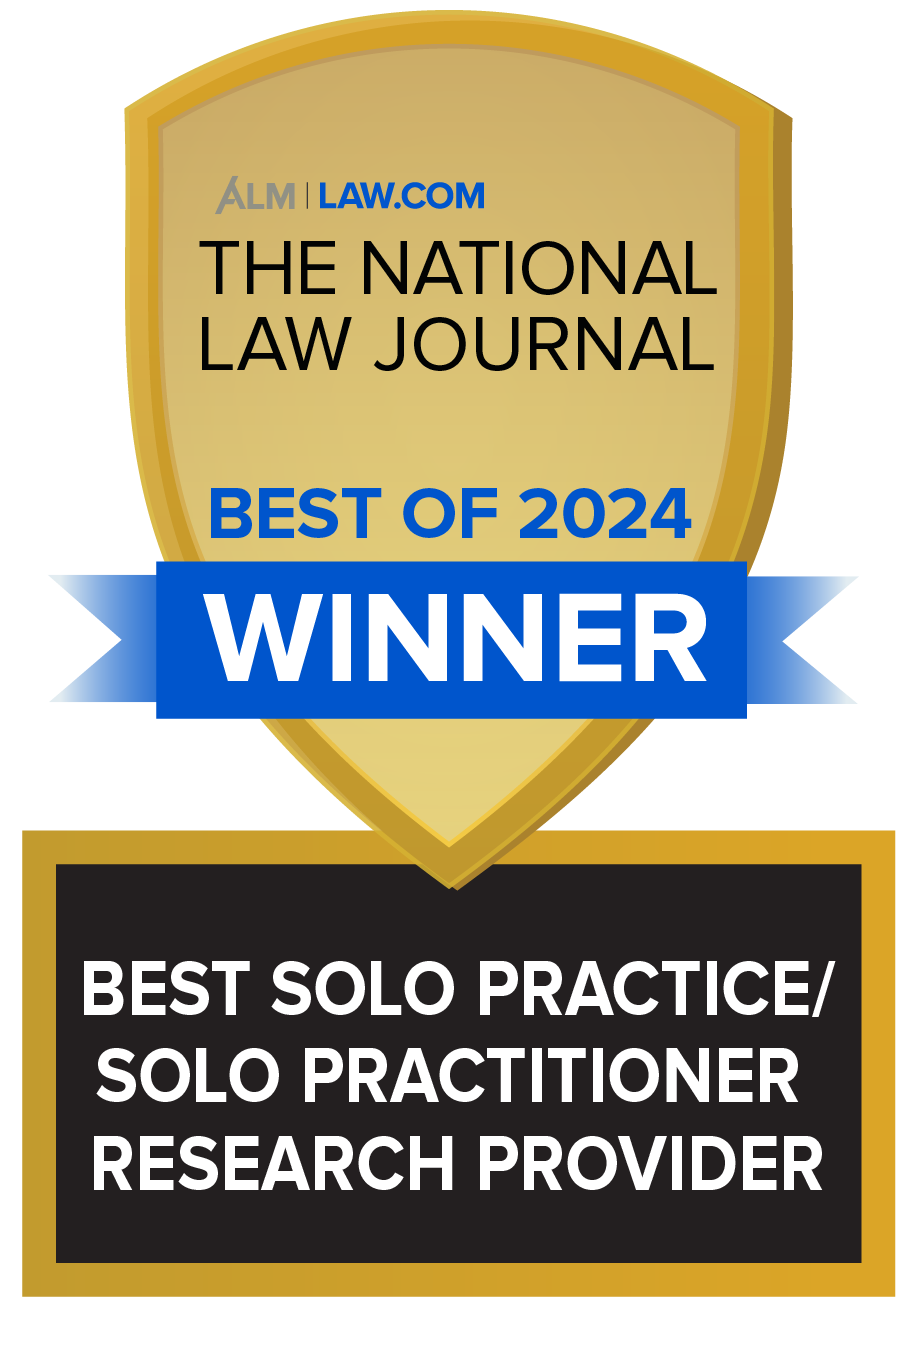 The National Law Journal best of 2024 award logo